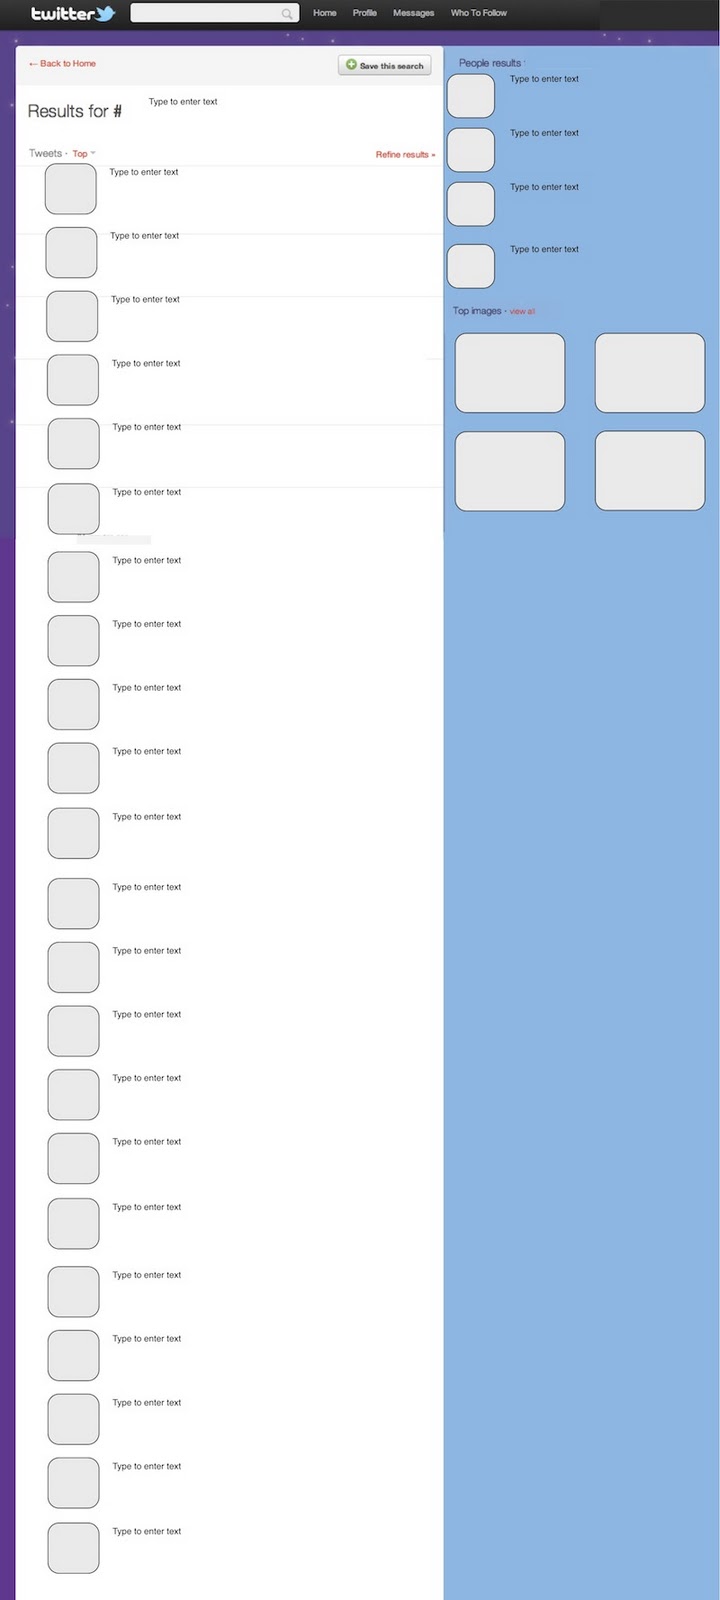 blank-tweet-template-for-students